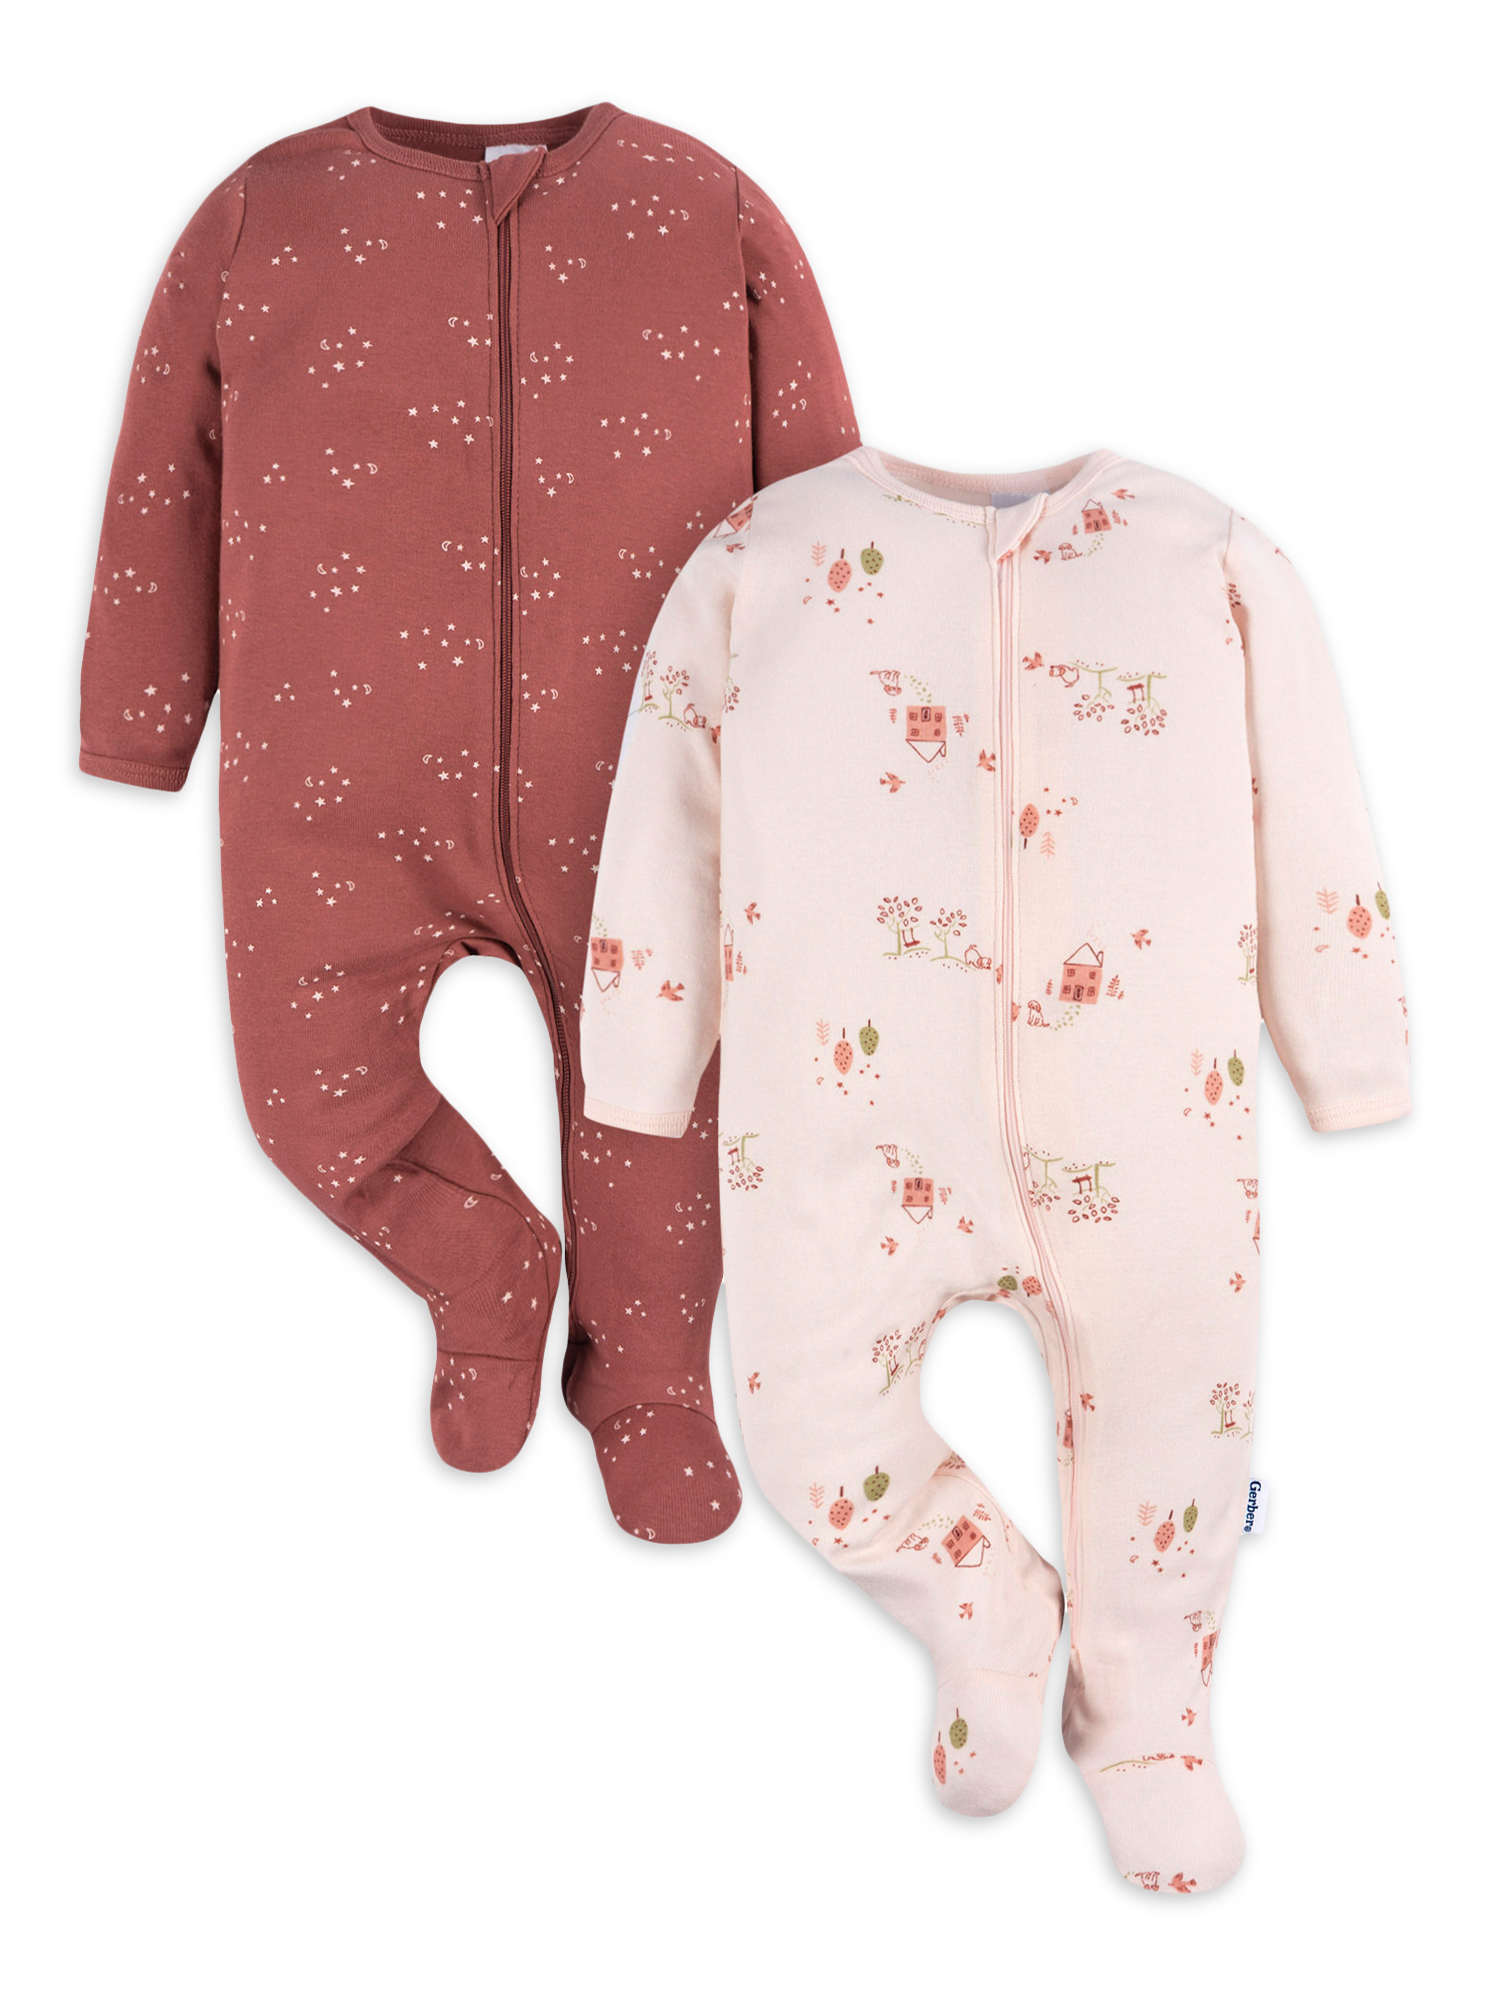 Gerber Baby Girl Sleep´N Play Footed Cotton Pajamas, 2-Pack, Sizes Newborn - 3/6 Months - image 1 of 12